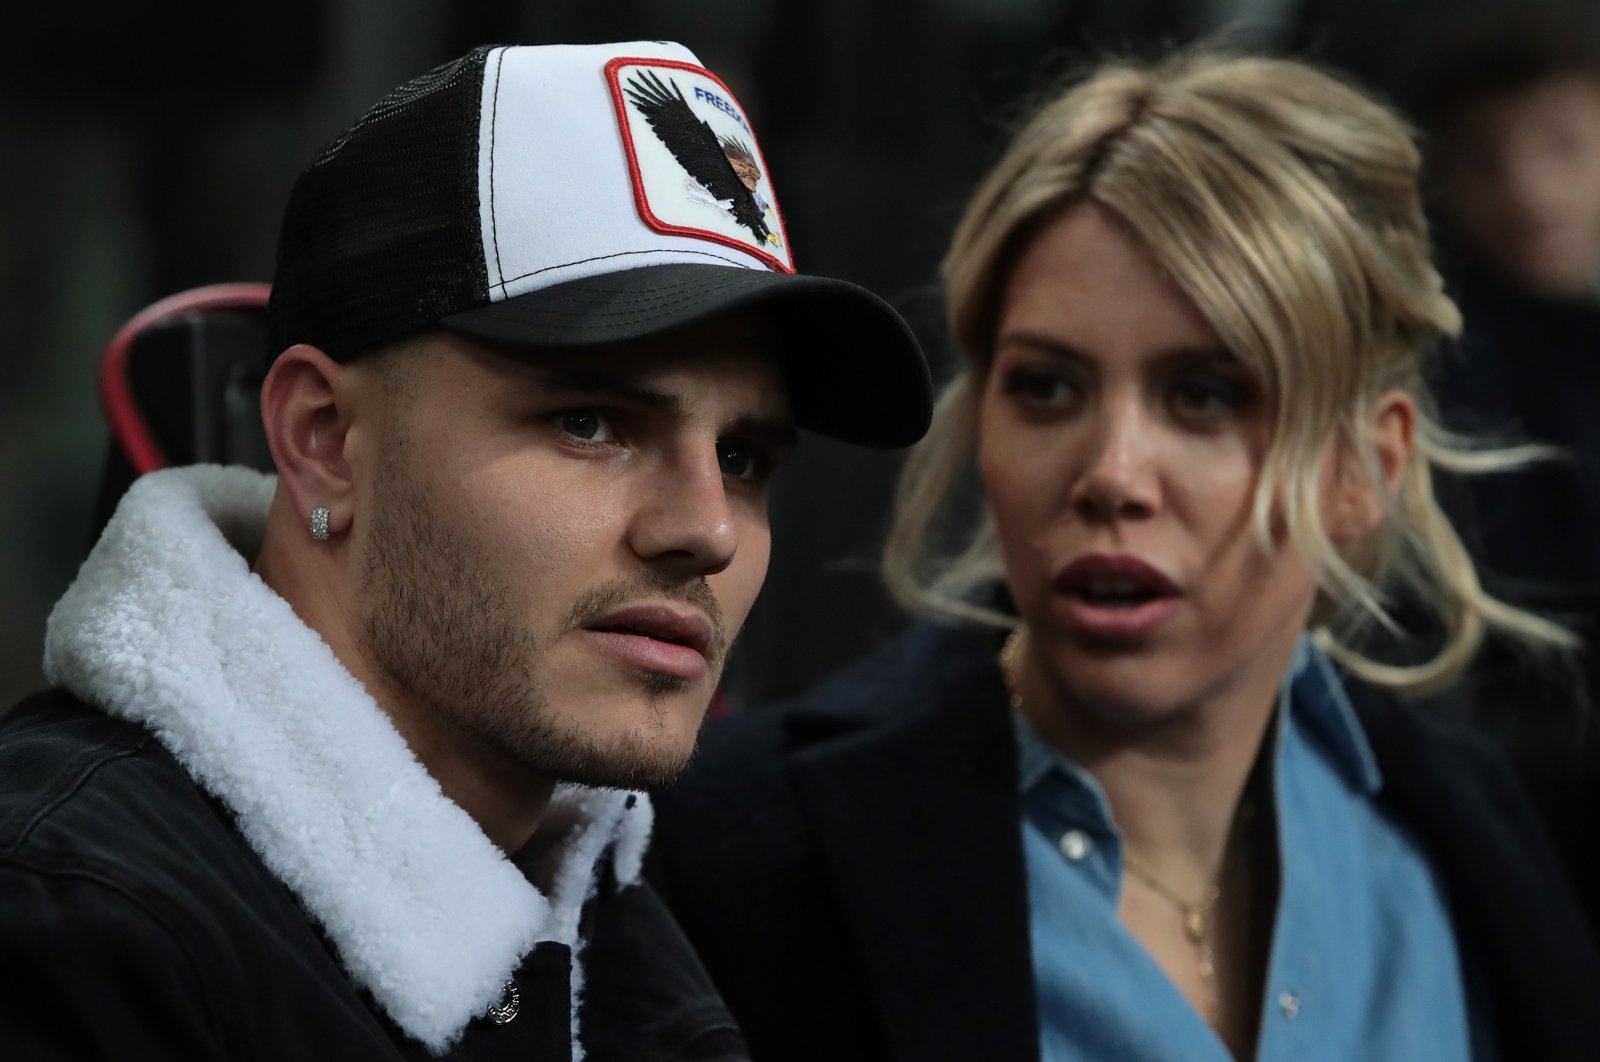 Mauro Icardi (L) and his wife Wanda Nara attend the UEFA Europa League Round of 32 Second Leg match between Inter Milan and SK Rapid Wien, Milan, Italy, Feb. 21, 2019. (Getty Images Photo)